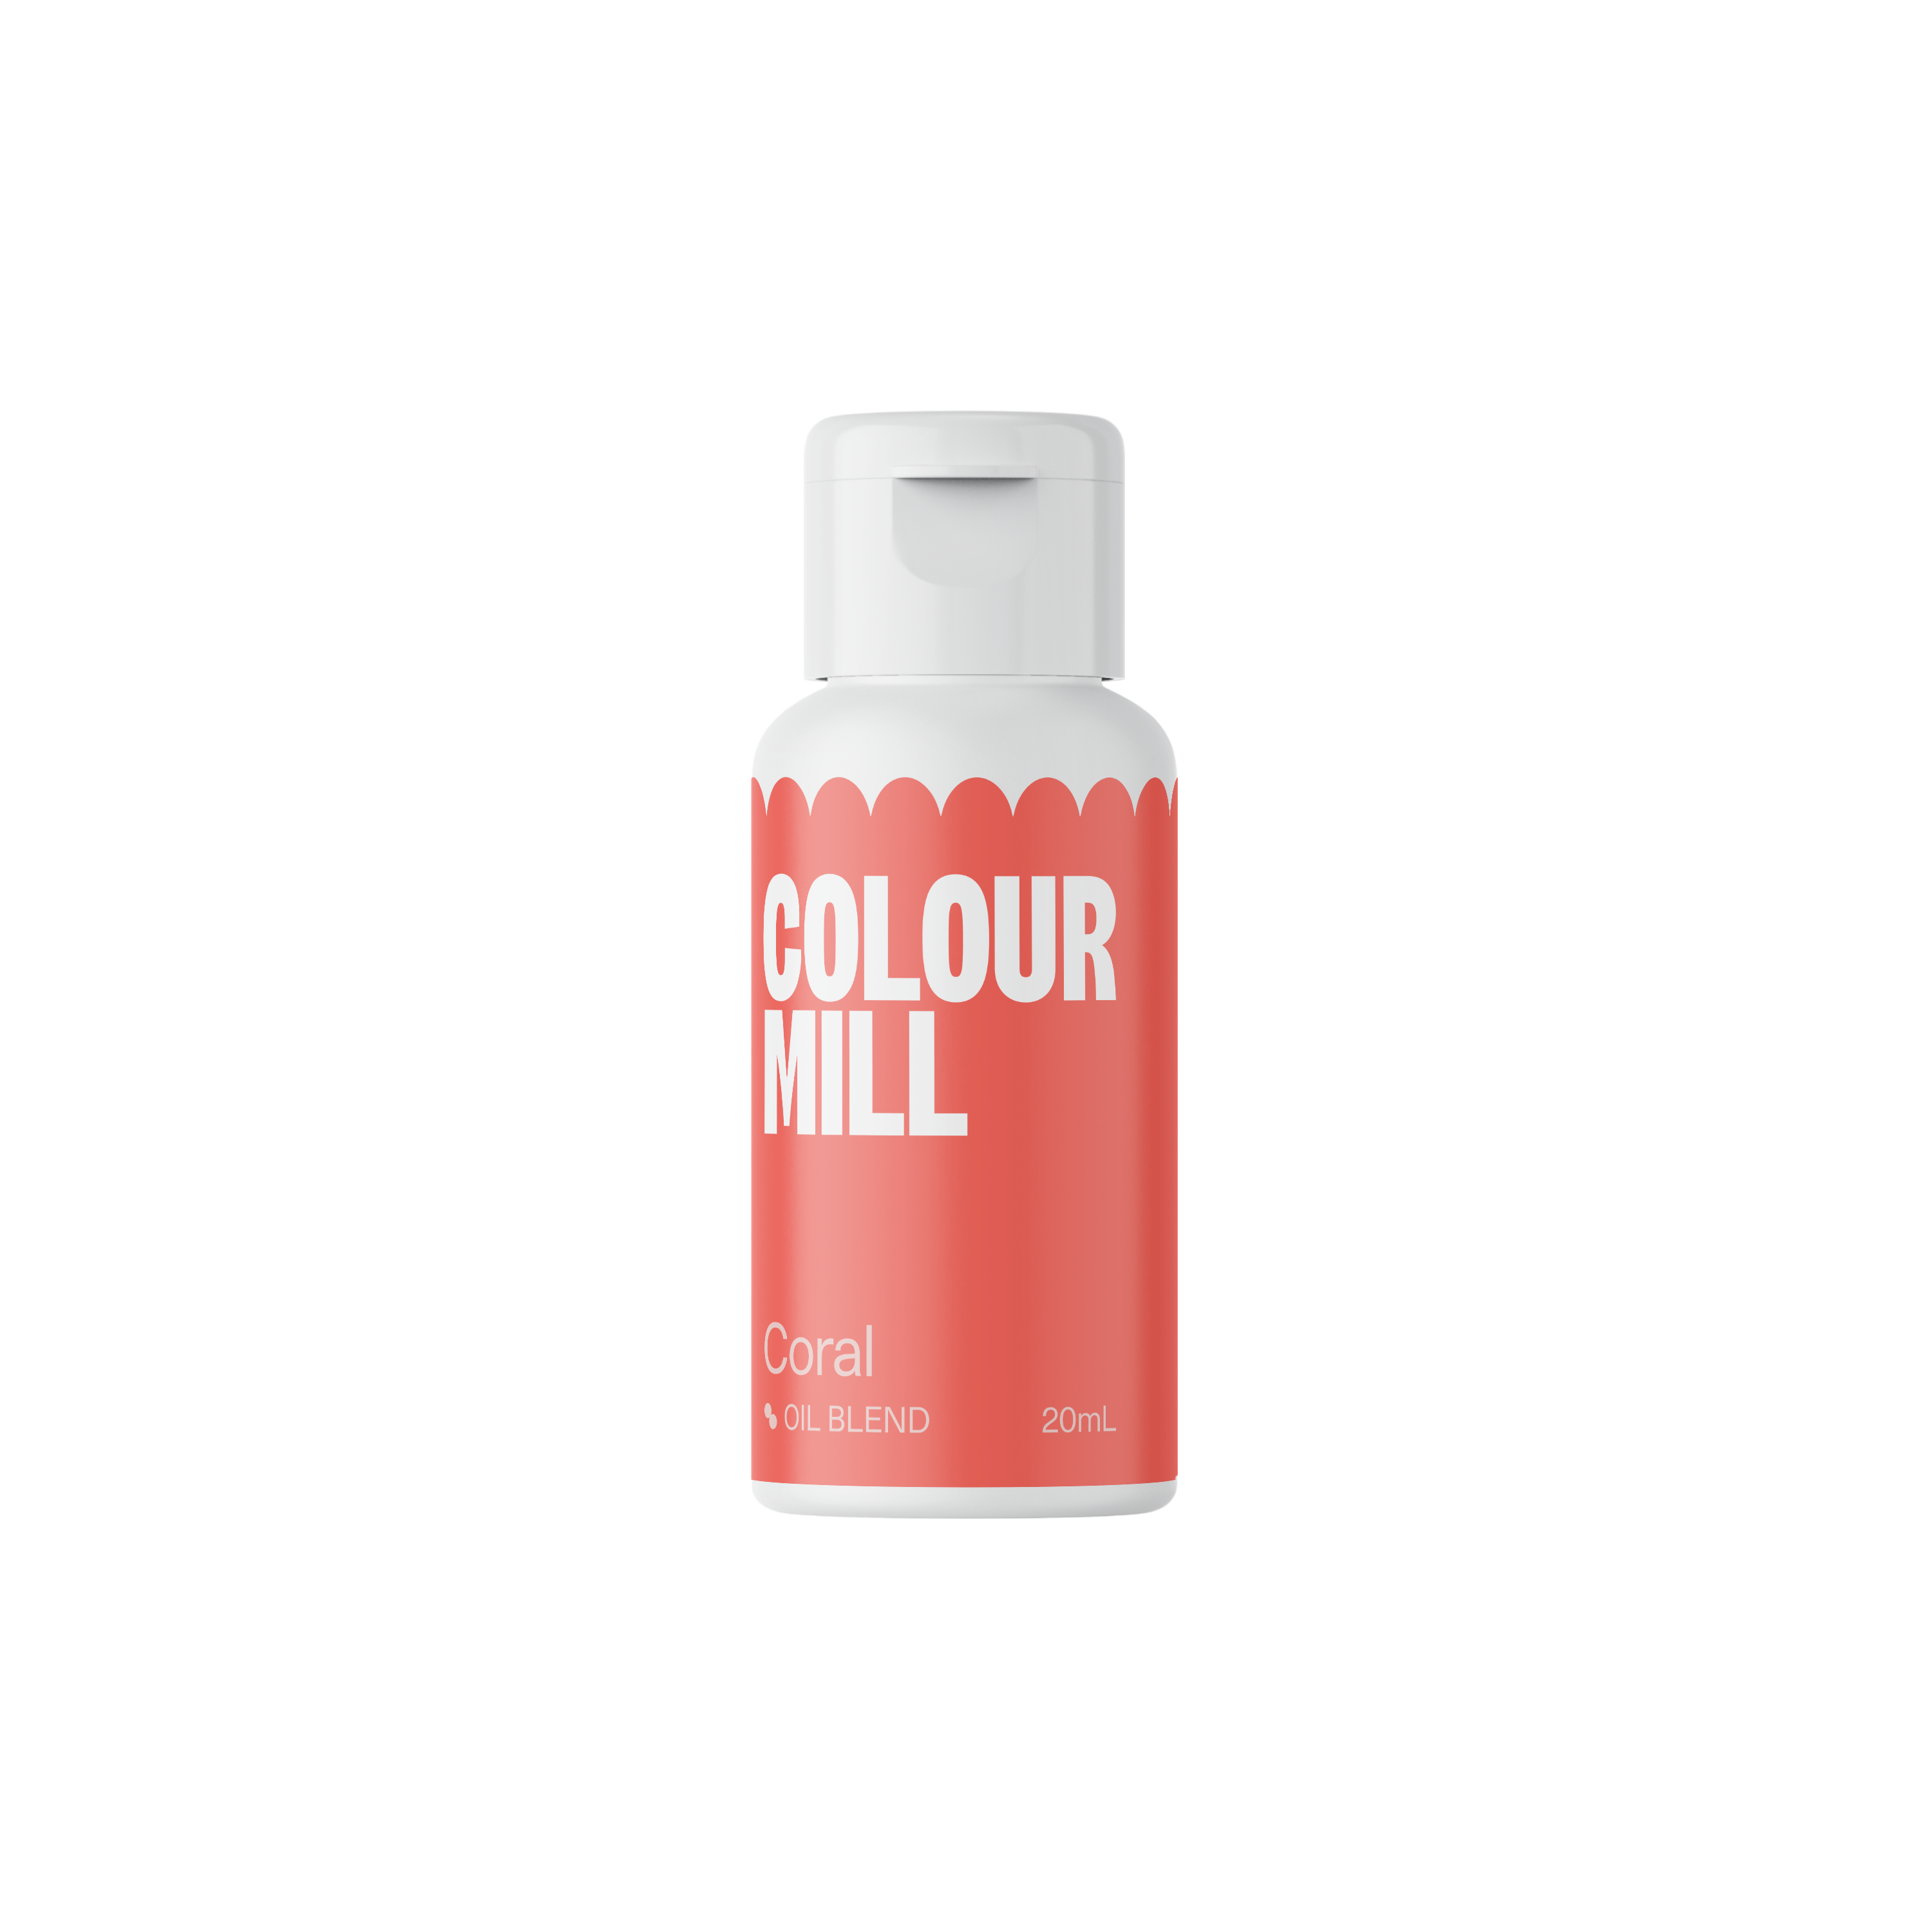 Colour Mill Oil Based Food Colour 20ml - Coral